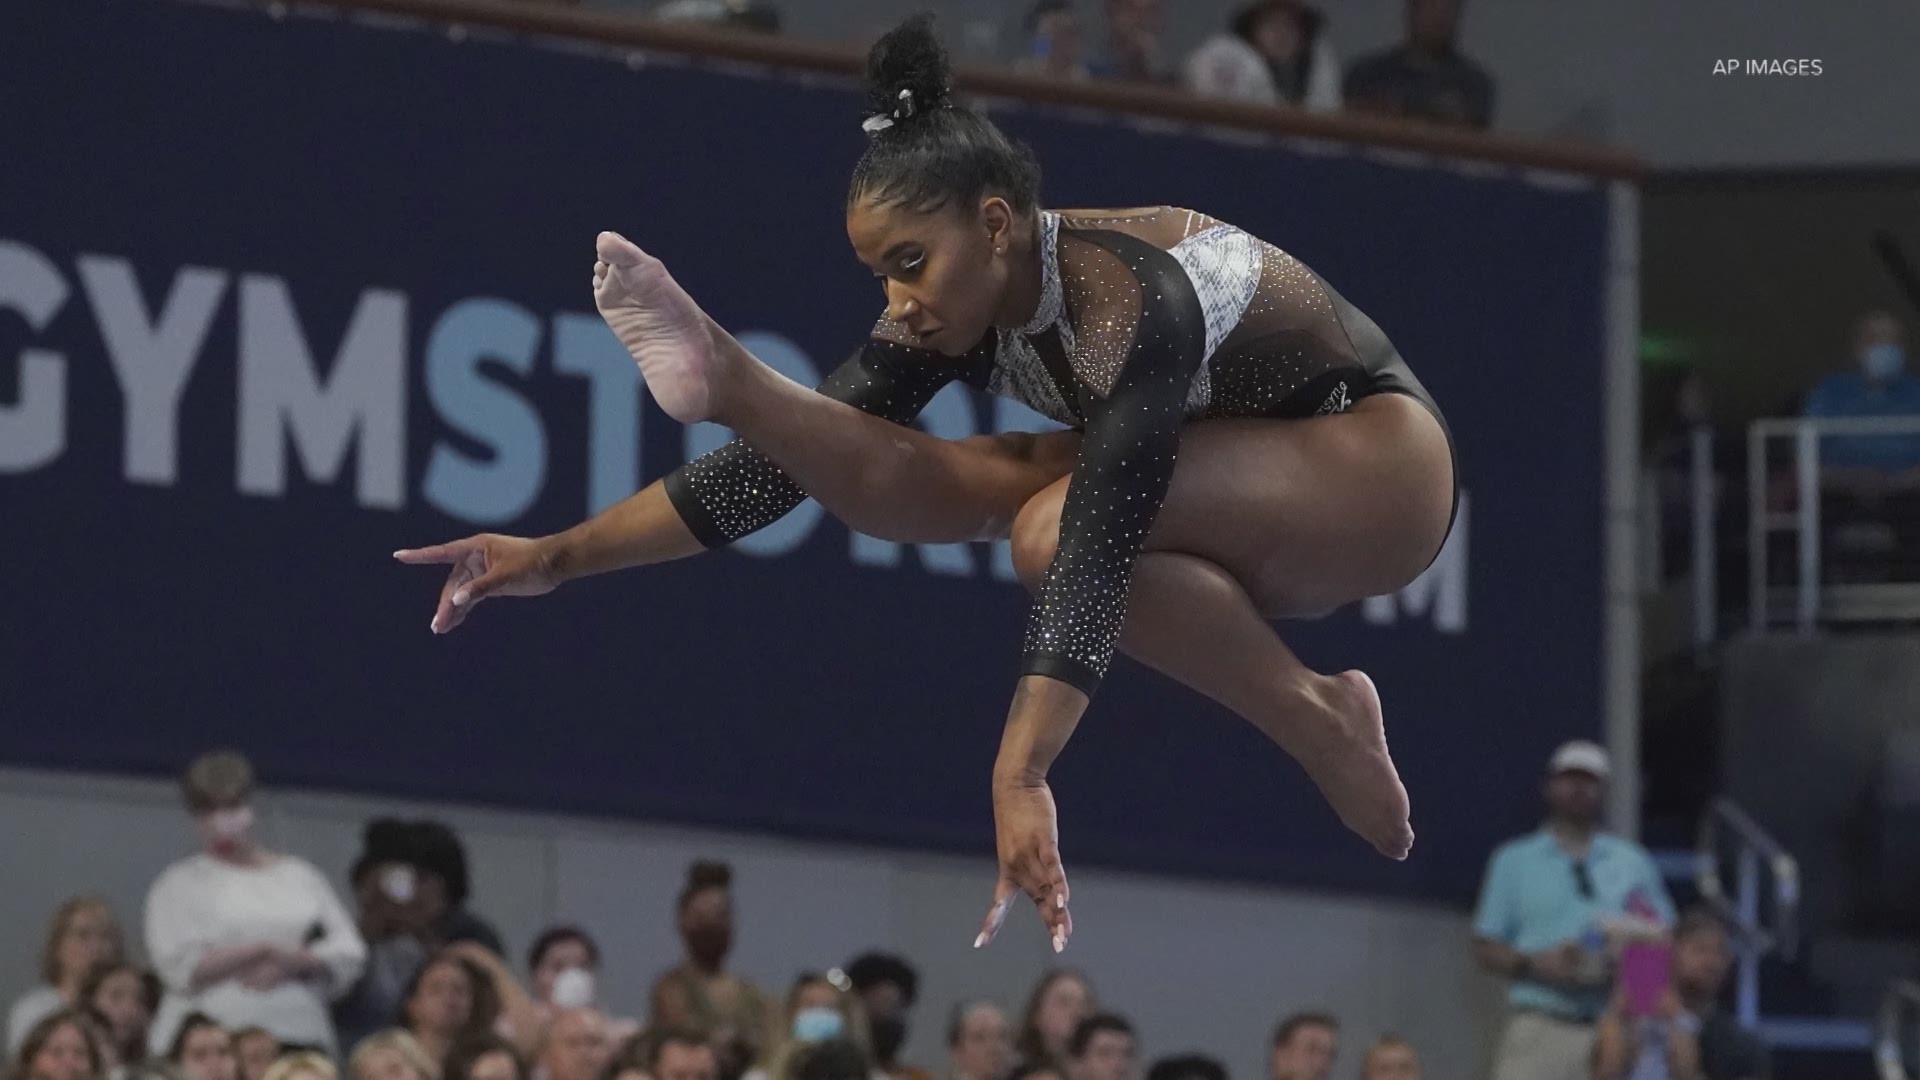 Vancouver, Washington's Jordan Chiles talks about her upbringing in gymnastics and her friendship with teammate Simone Biles.